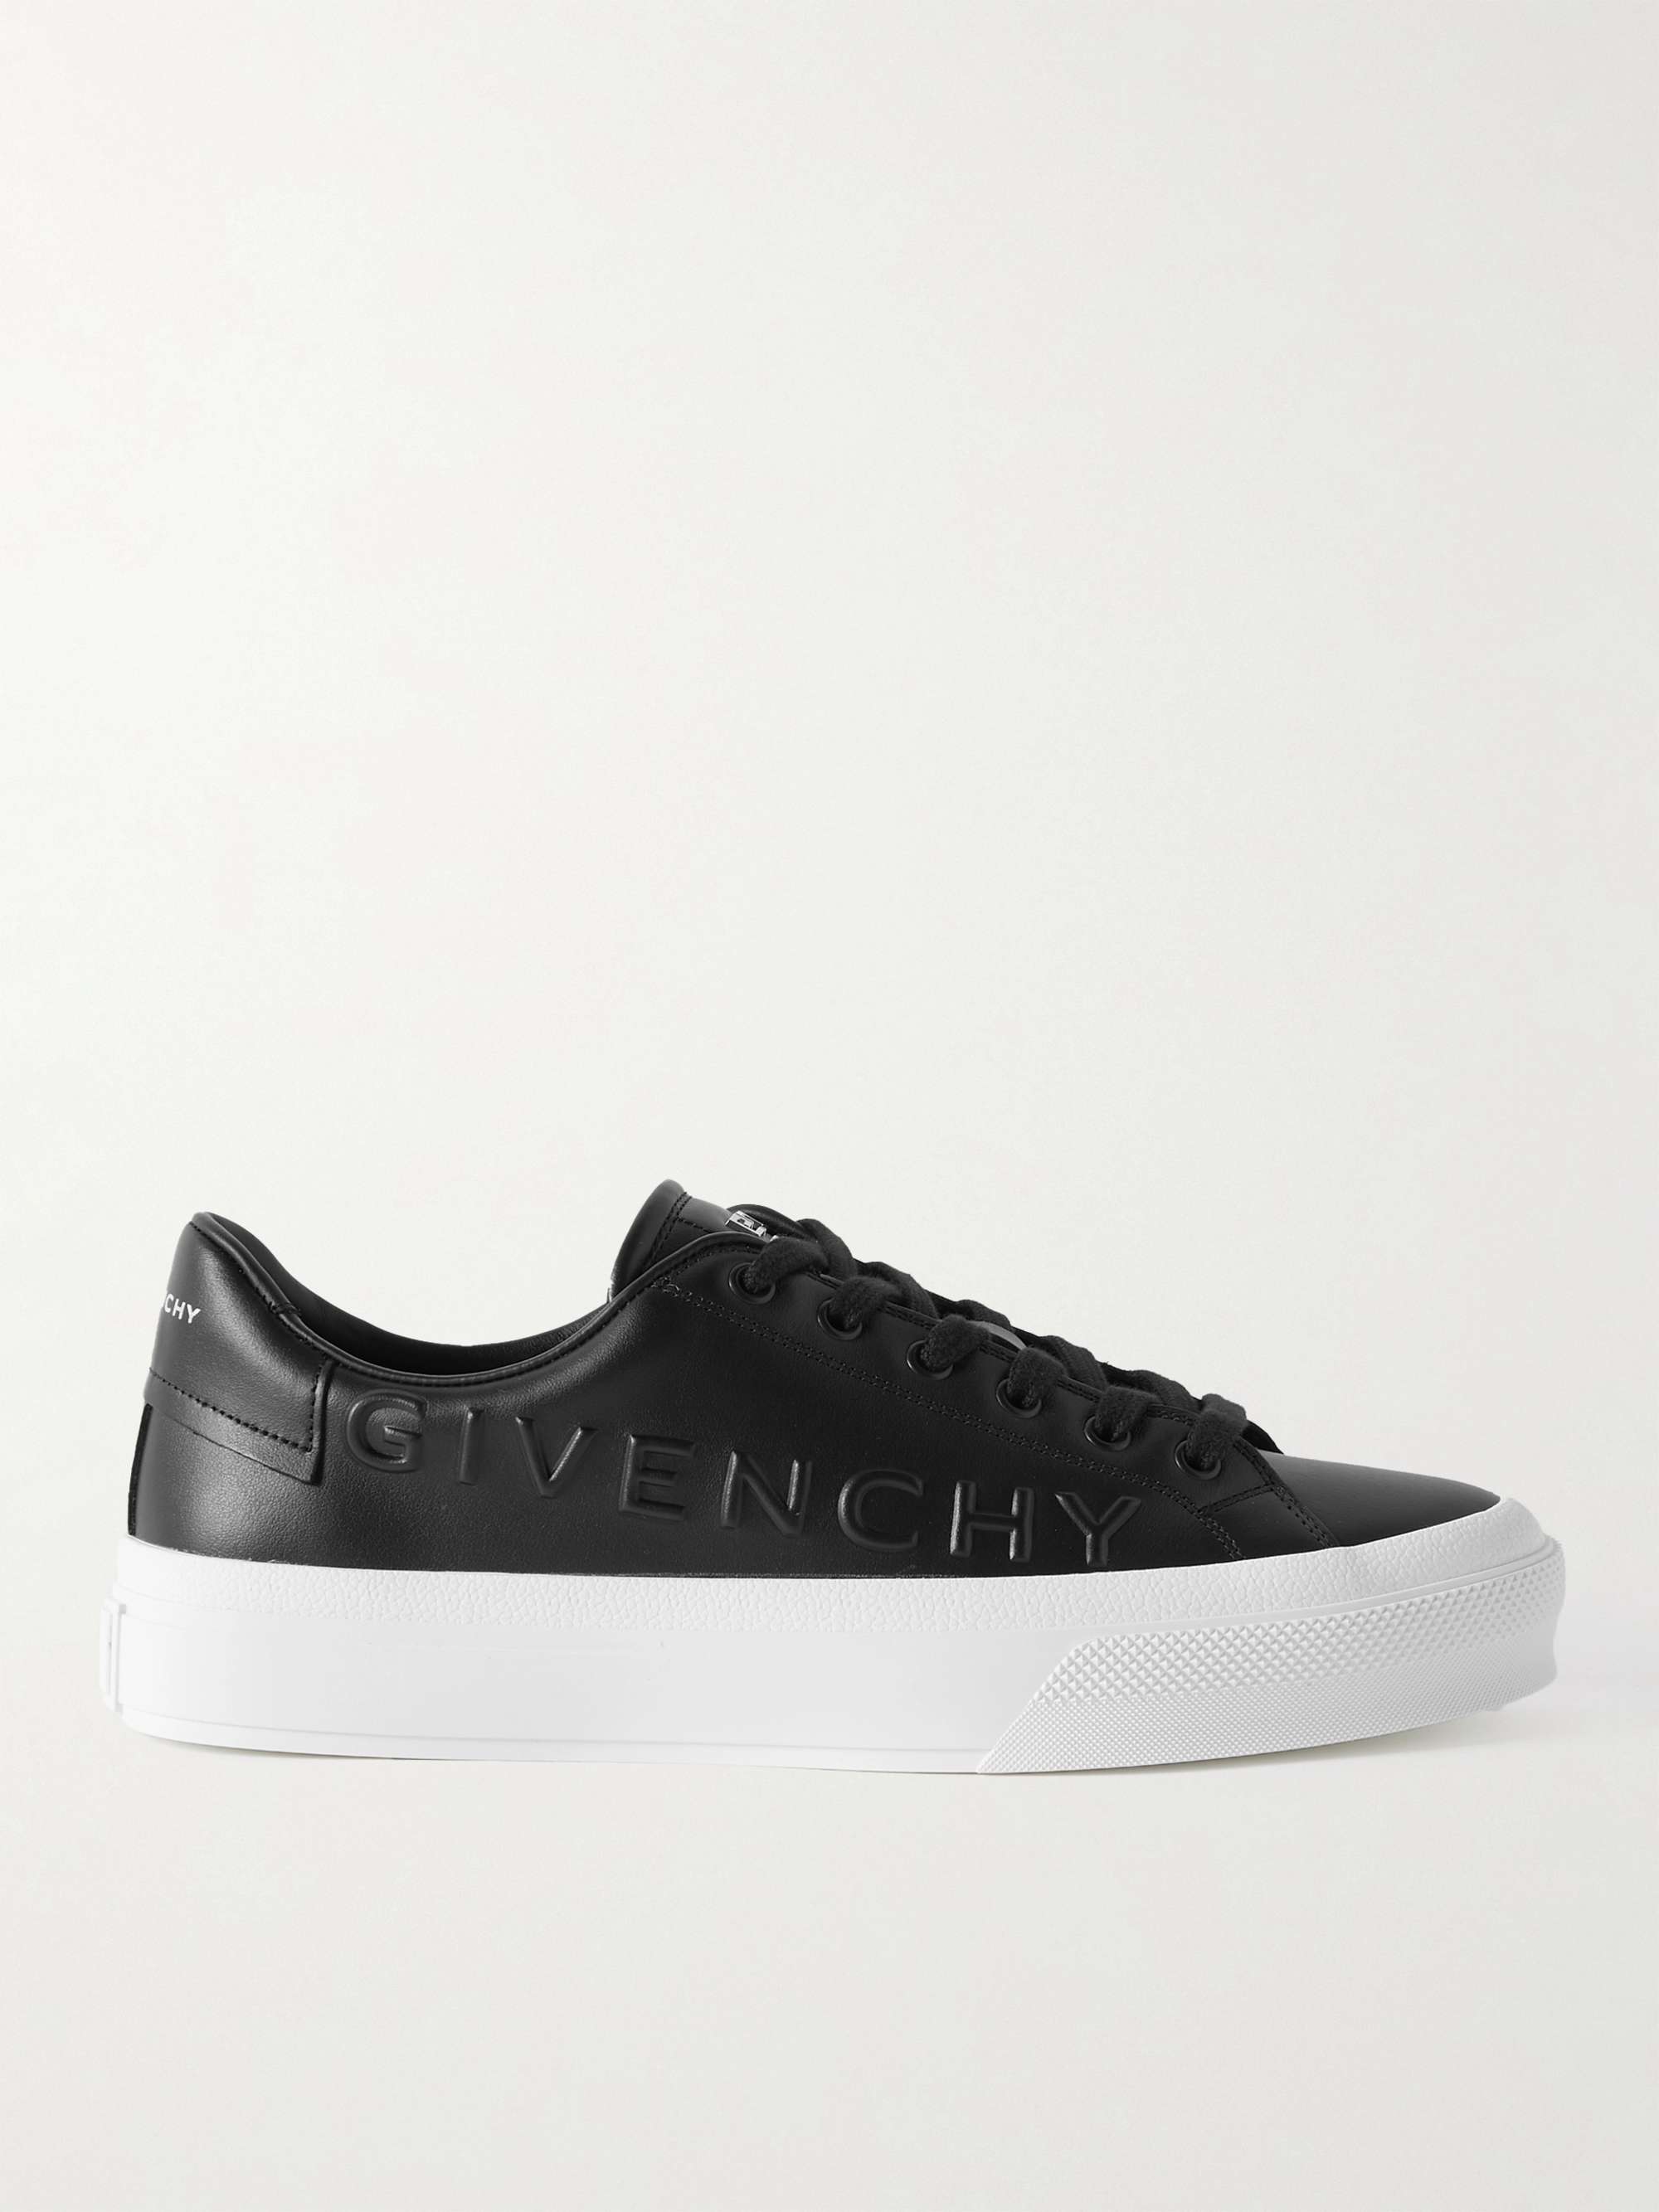 GIVENCHY City Sport Logo-Embossed Leather Sneakers for Men | MR PORTER